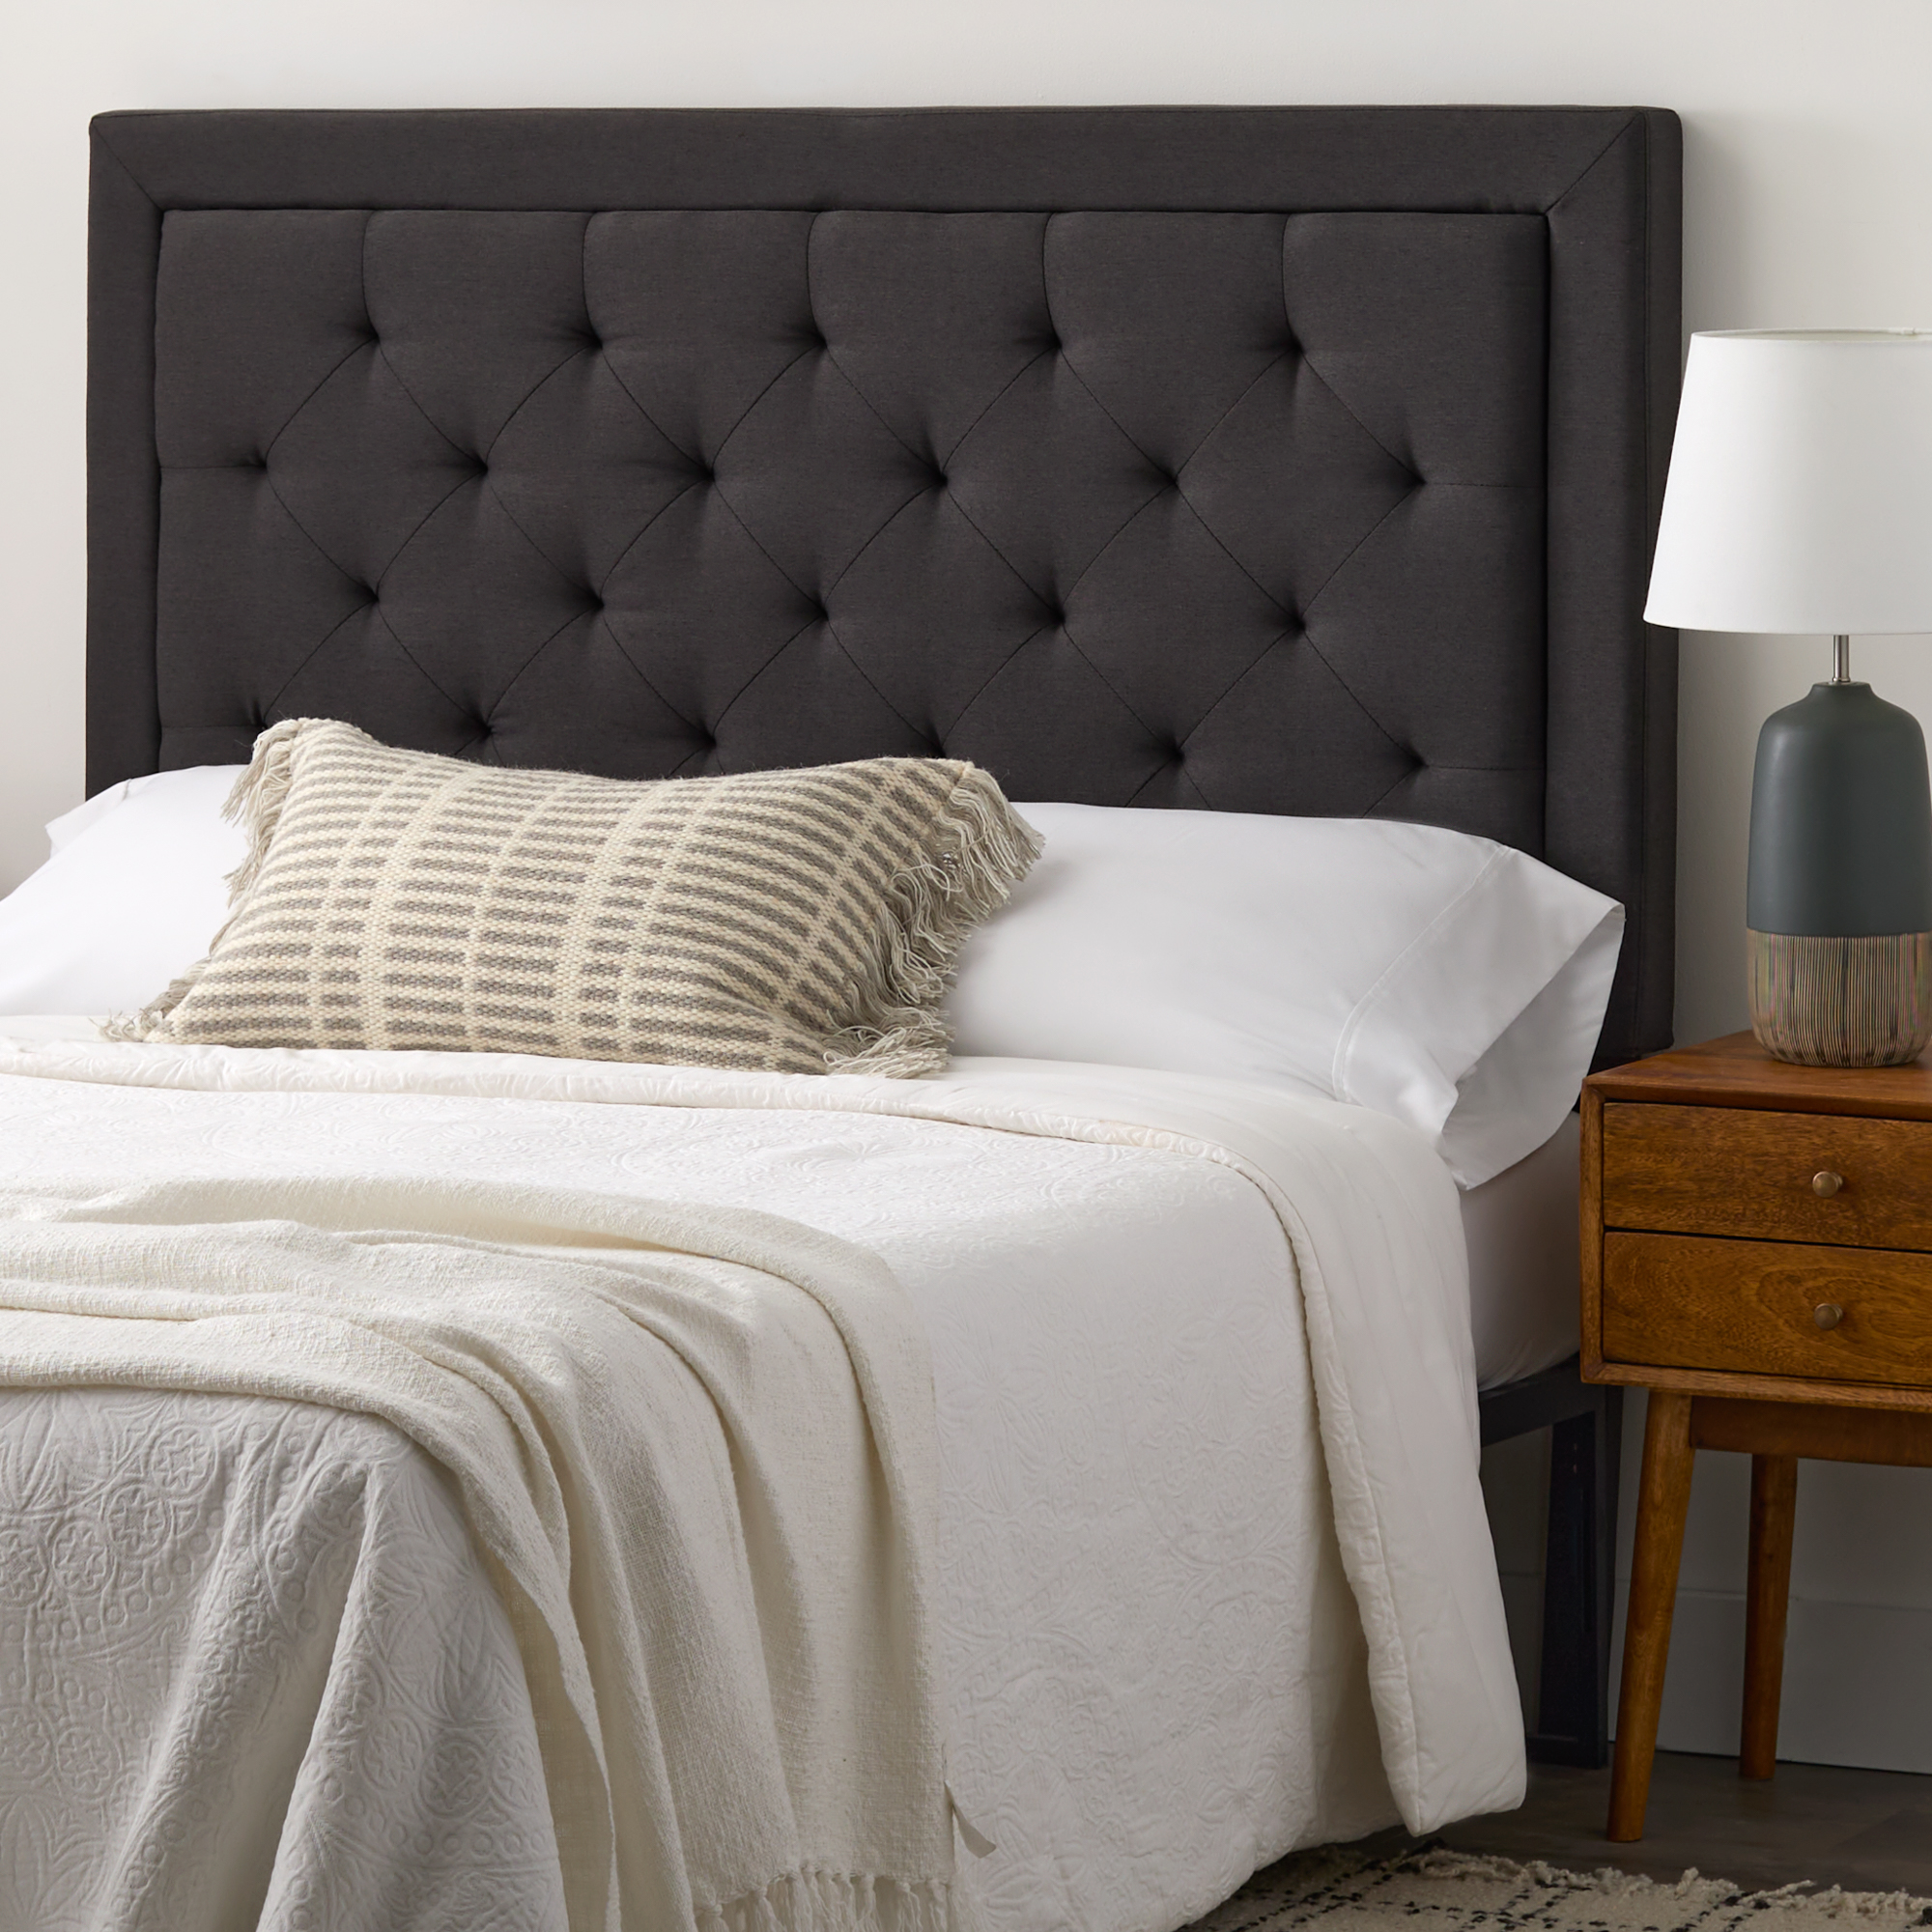 Rest Haven Medford Rectangle Upholstered Headboard with Diamond Tufting, Queen, Charcoal - image 1 of 11